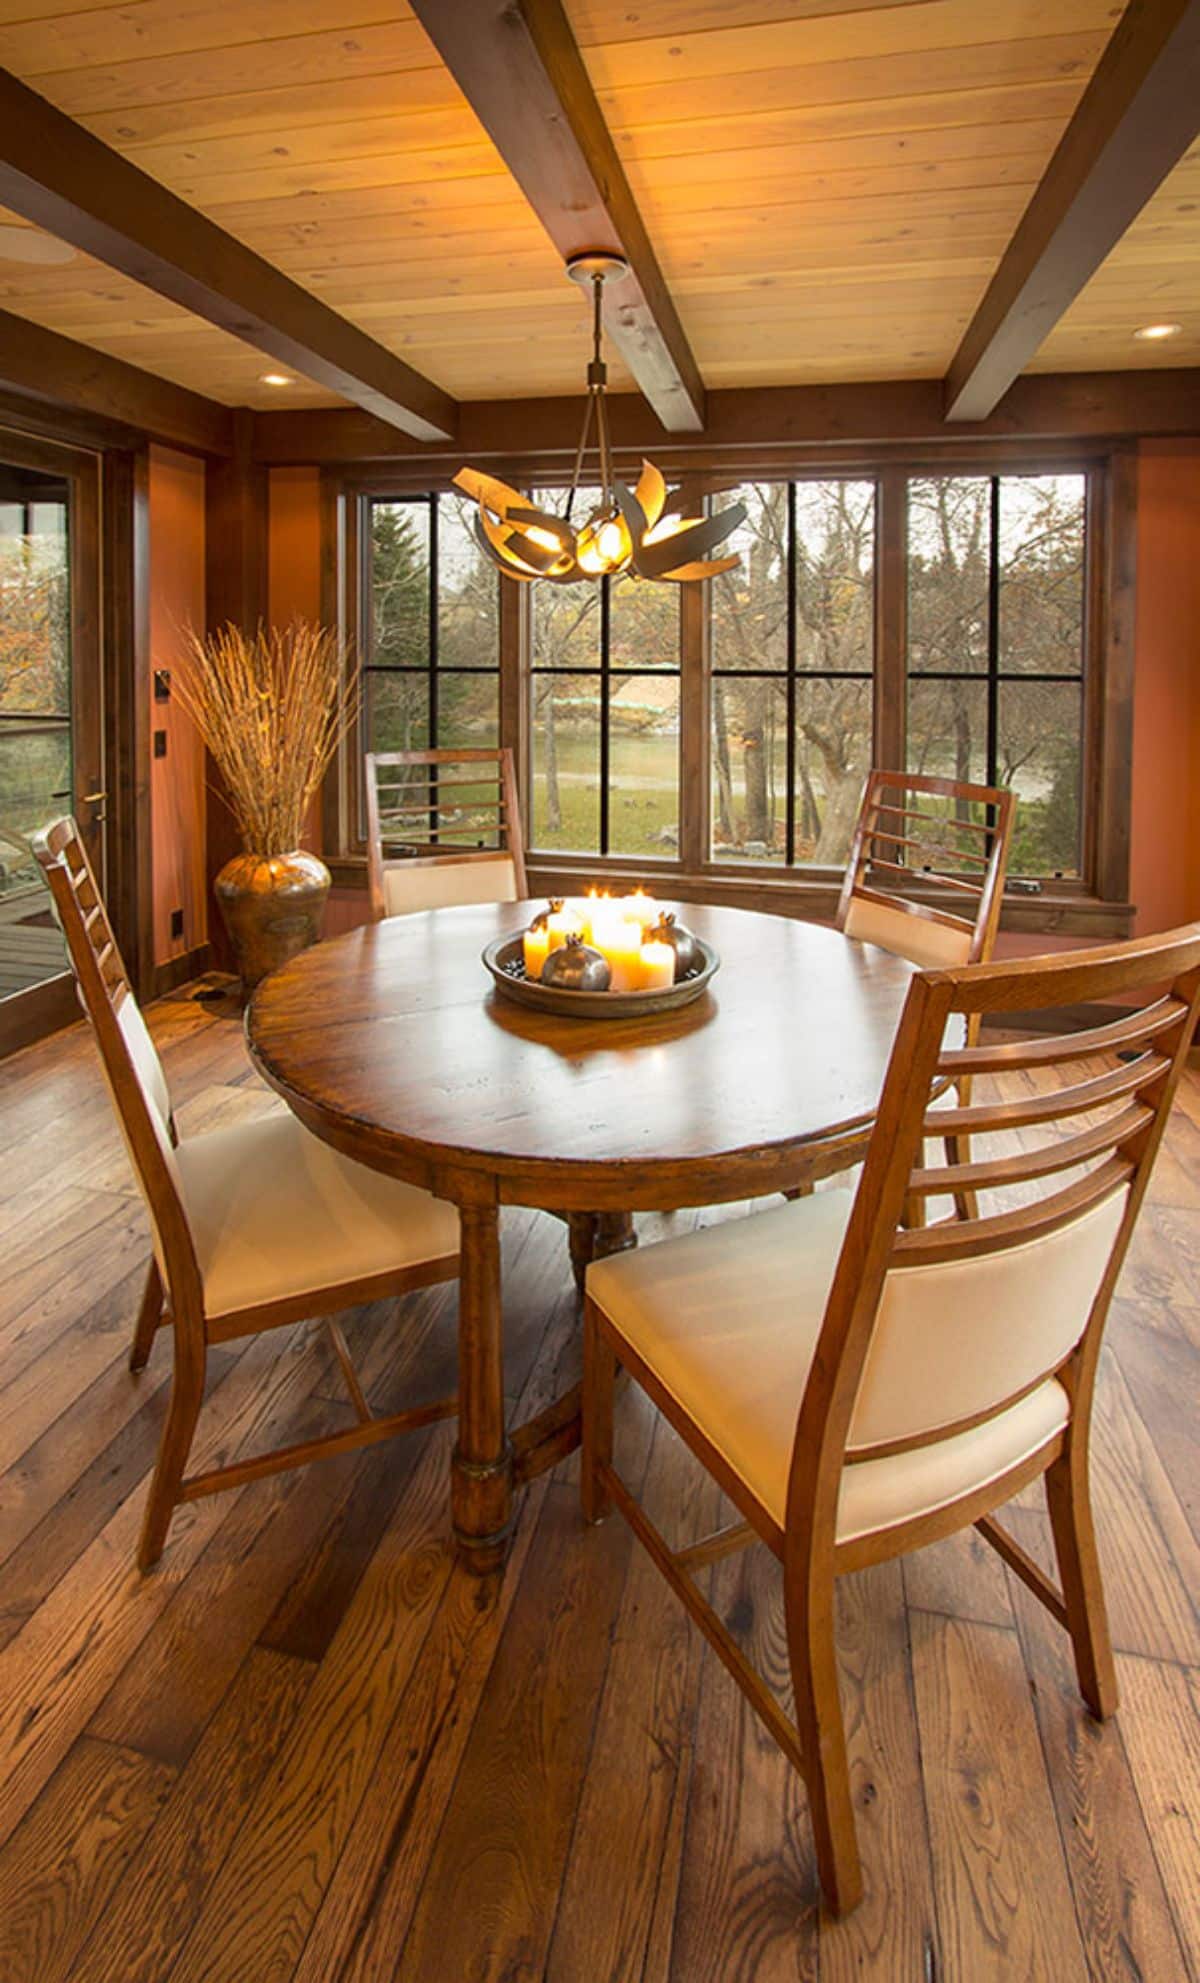 wooden round table with high back wood chairs and wall of windows in background